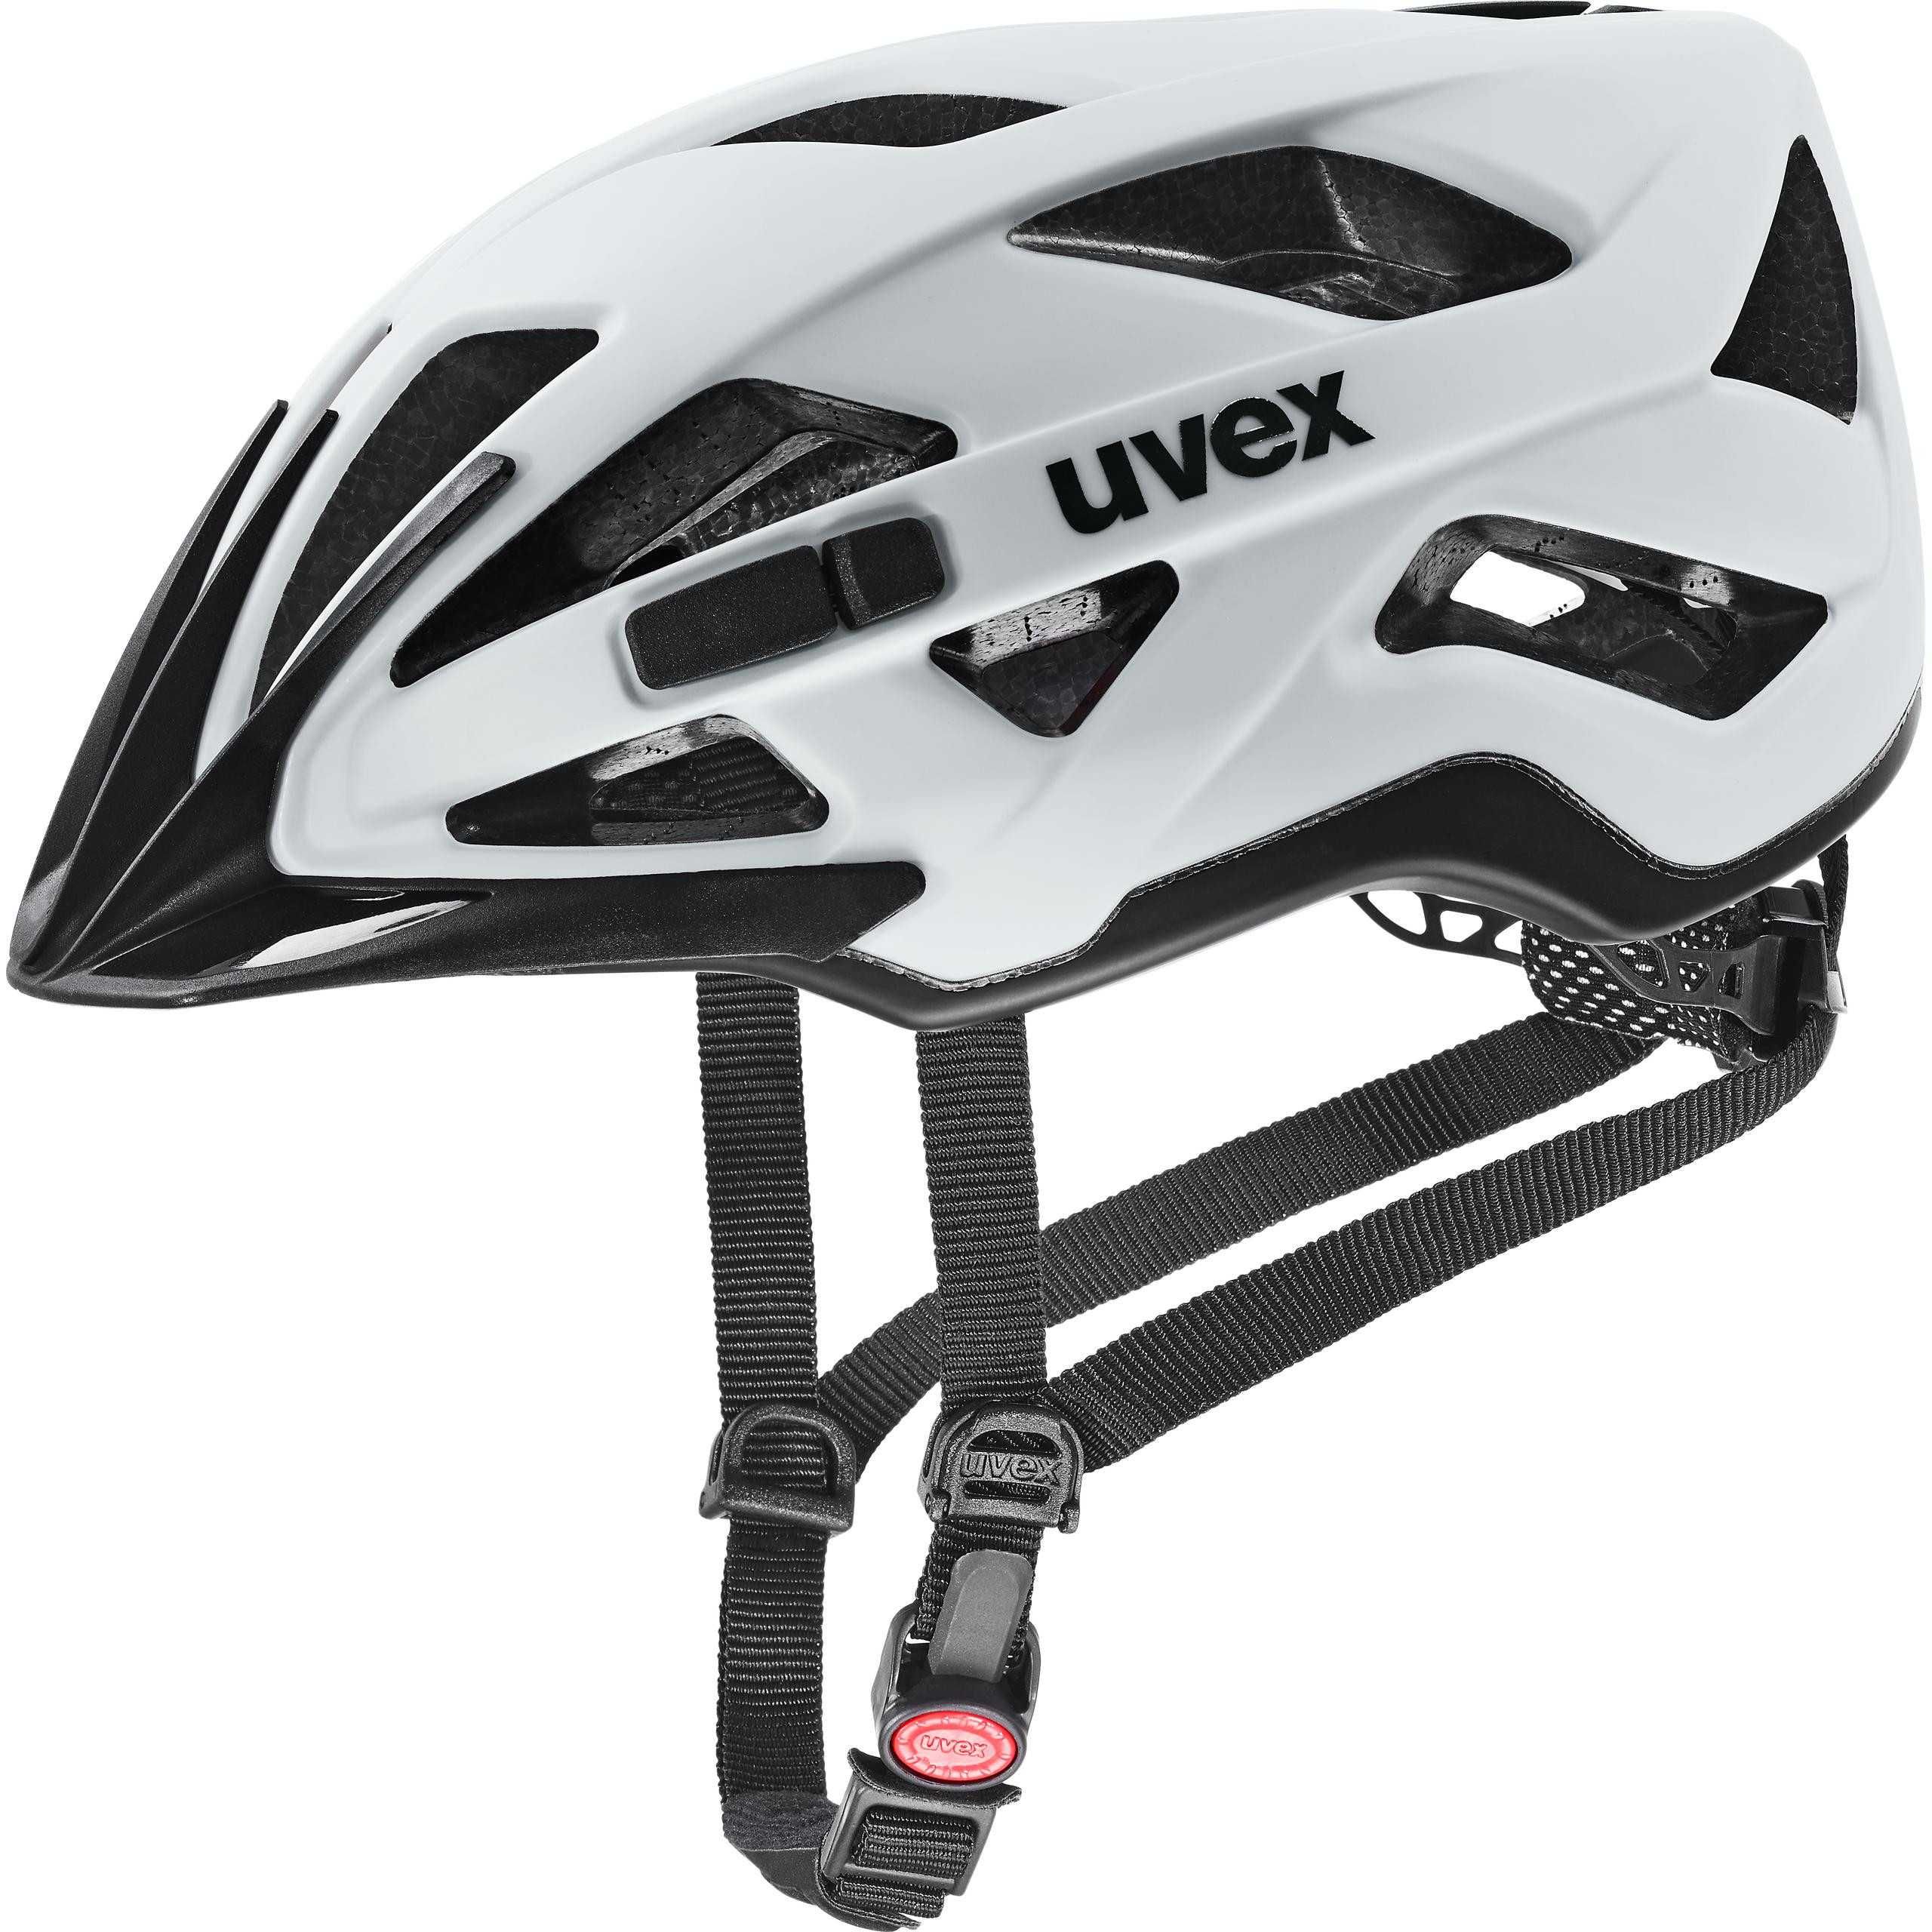 Uvex kask rowerowy Active CC papyrus mat 56-60 cm